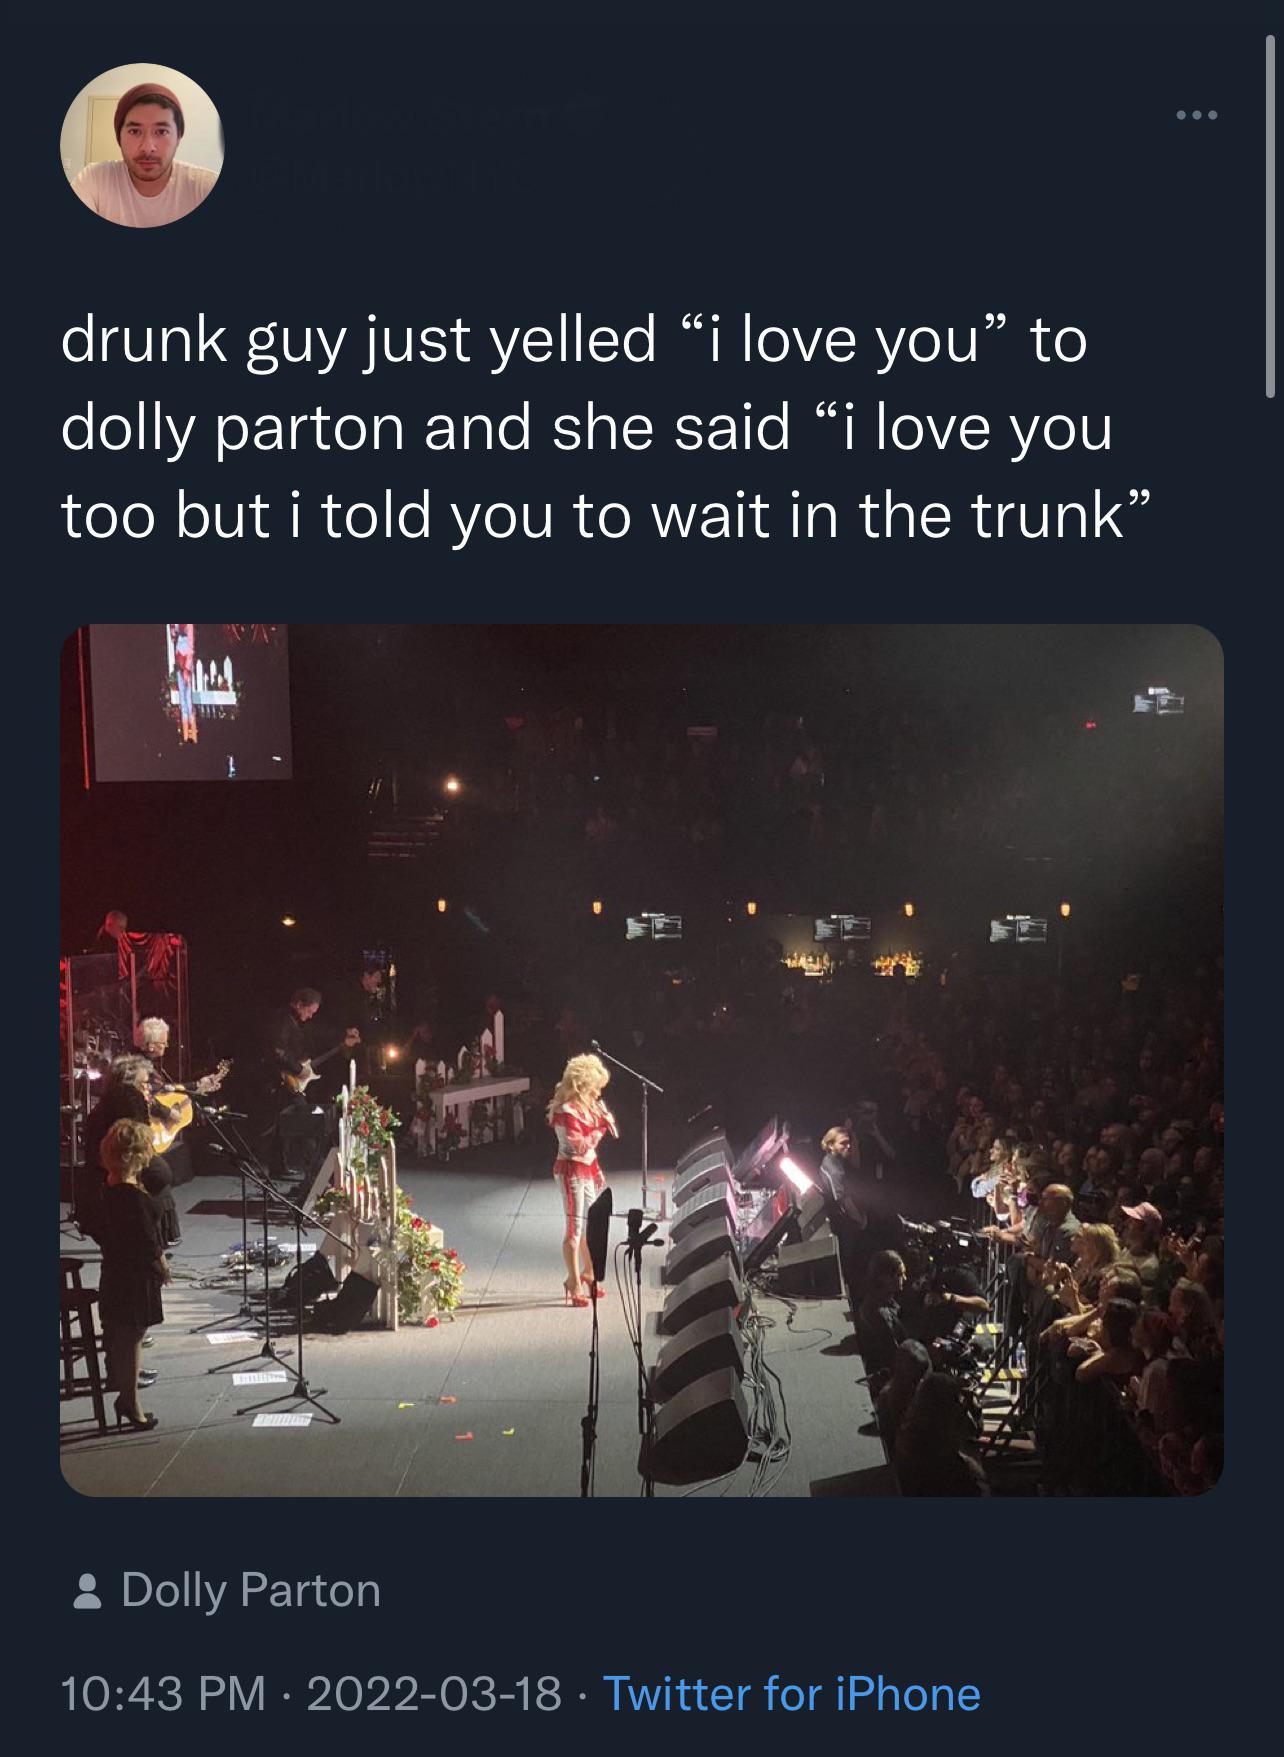 funny memes and random tweets - graphic design - drunk guy just yelled "i love you" to dolly parton and she said "i love you too but i told you to wait in the trunk" 1 Dolly Parton . Twitter for iPhone